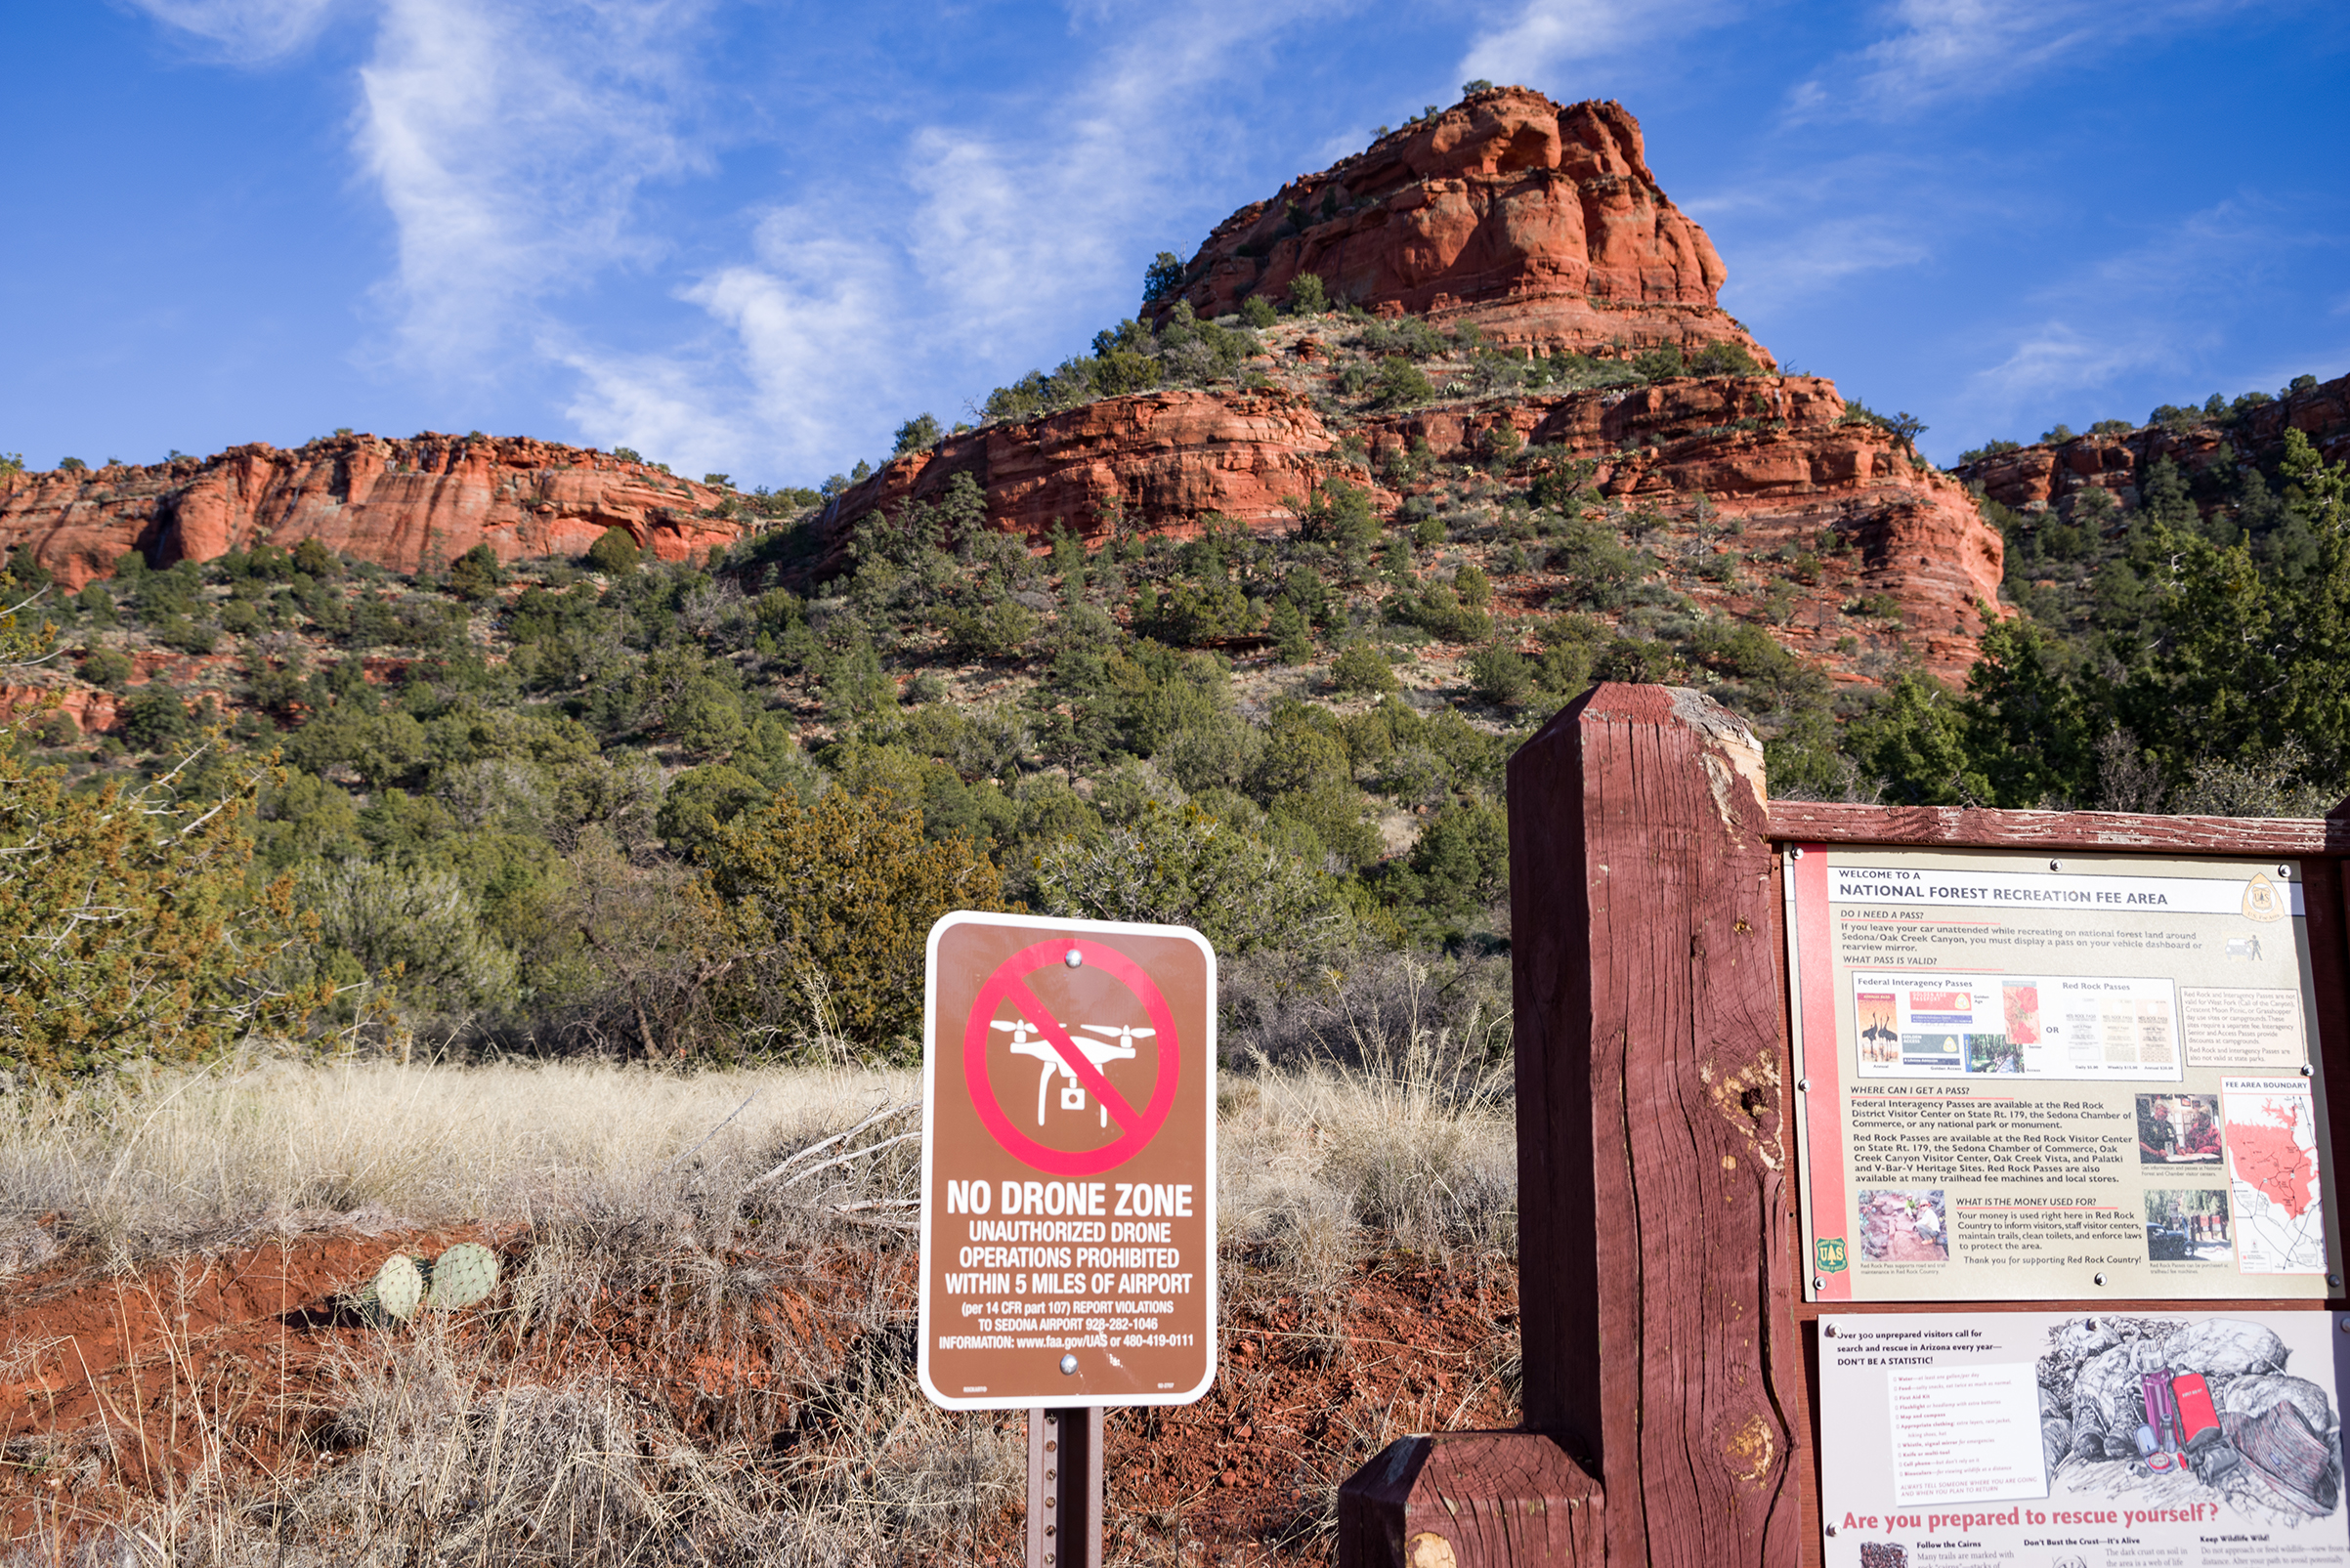 A "No Drone Zone" sign seen in Sedona, AZ. (Coconino National Forest)